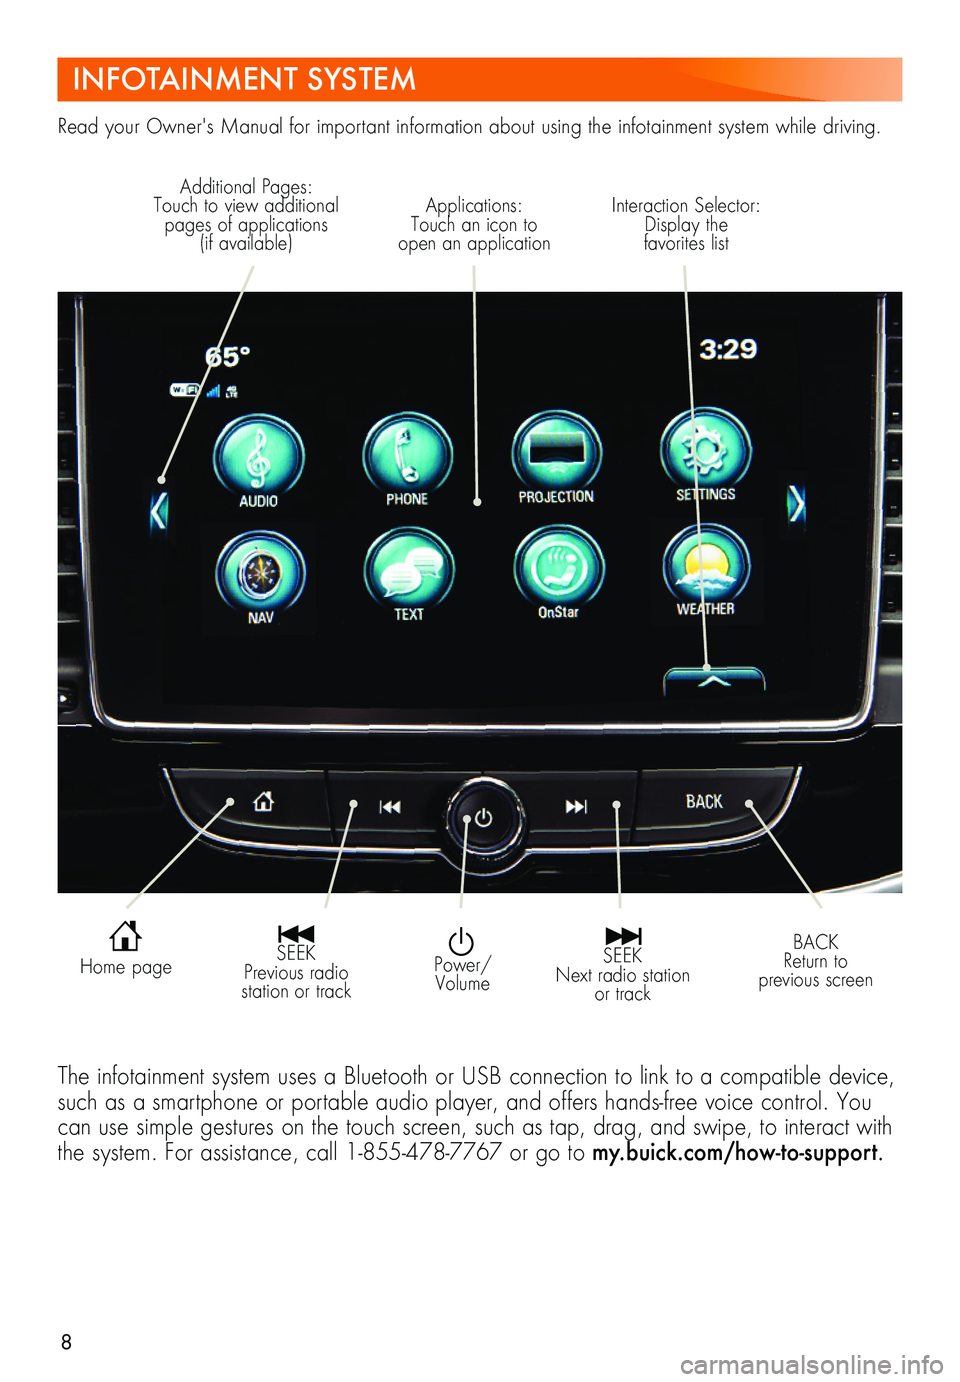 BUICK ENCORE 2021  Get To Know Guide 8
INFOTAINMENT SYSTEM
Read your Owner's Manual for important information about using the infotainment system while driving.
  Power/Volume
Interaction Selector: Display the  favorites list
Additio